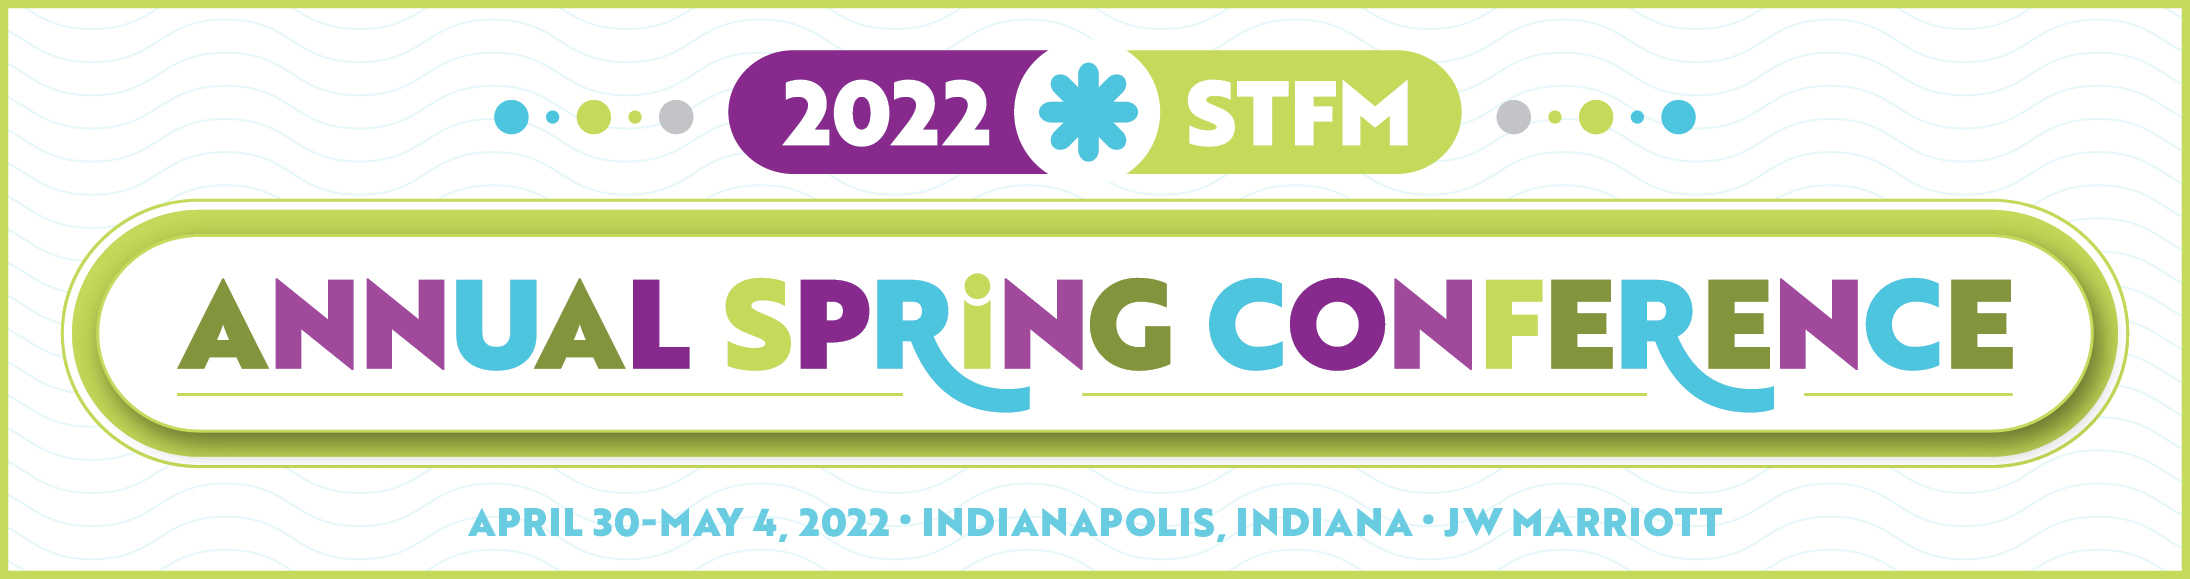 STFM Annual Spring Conference 2022